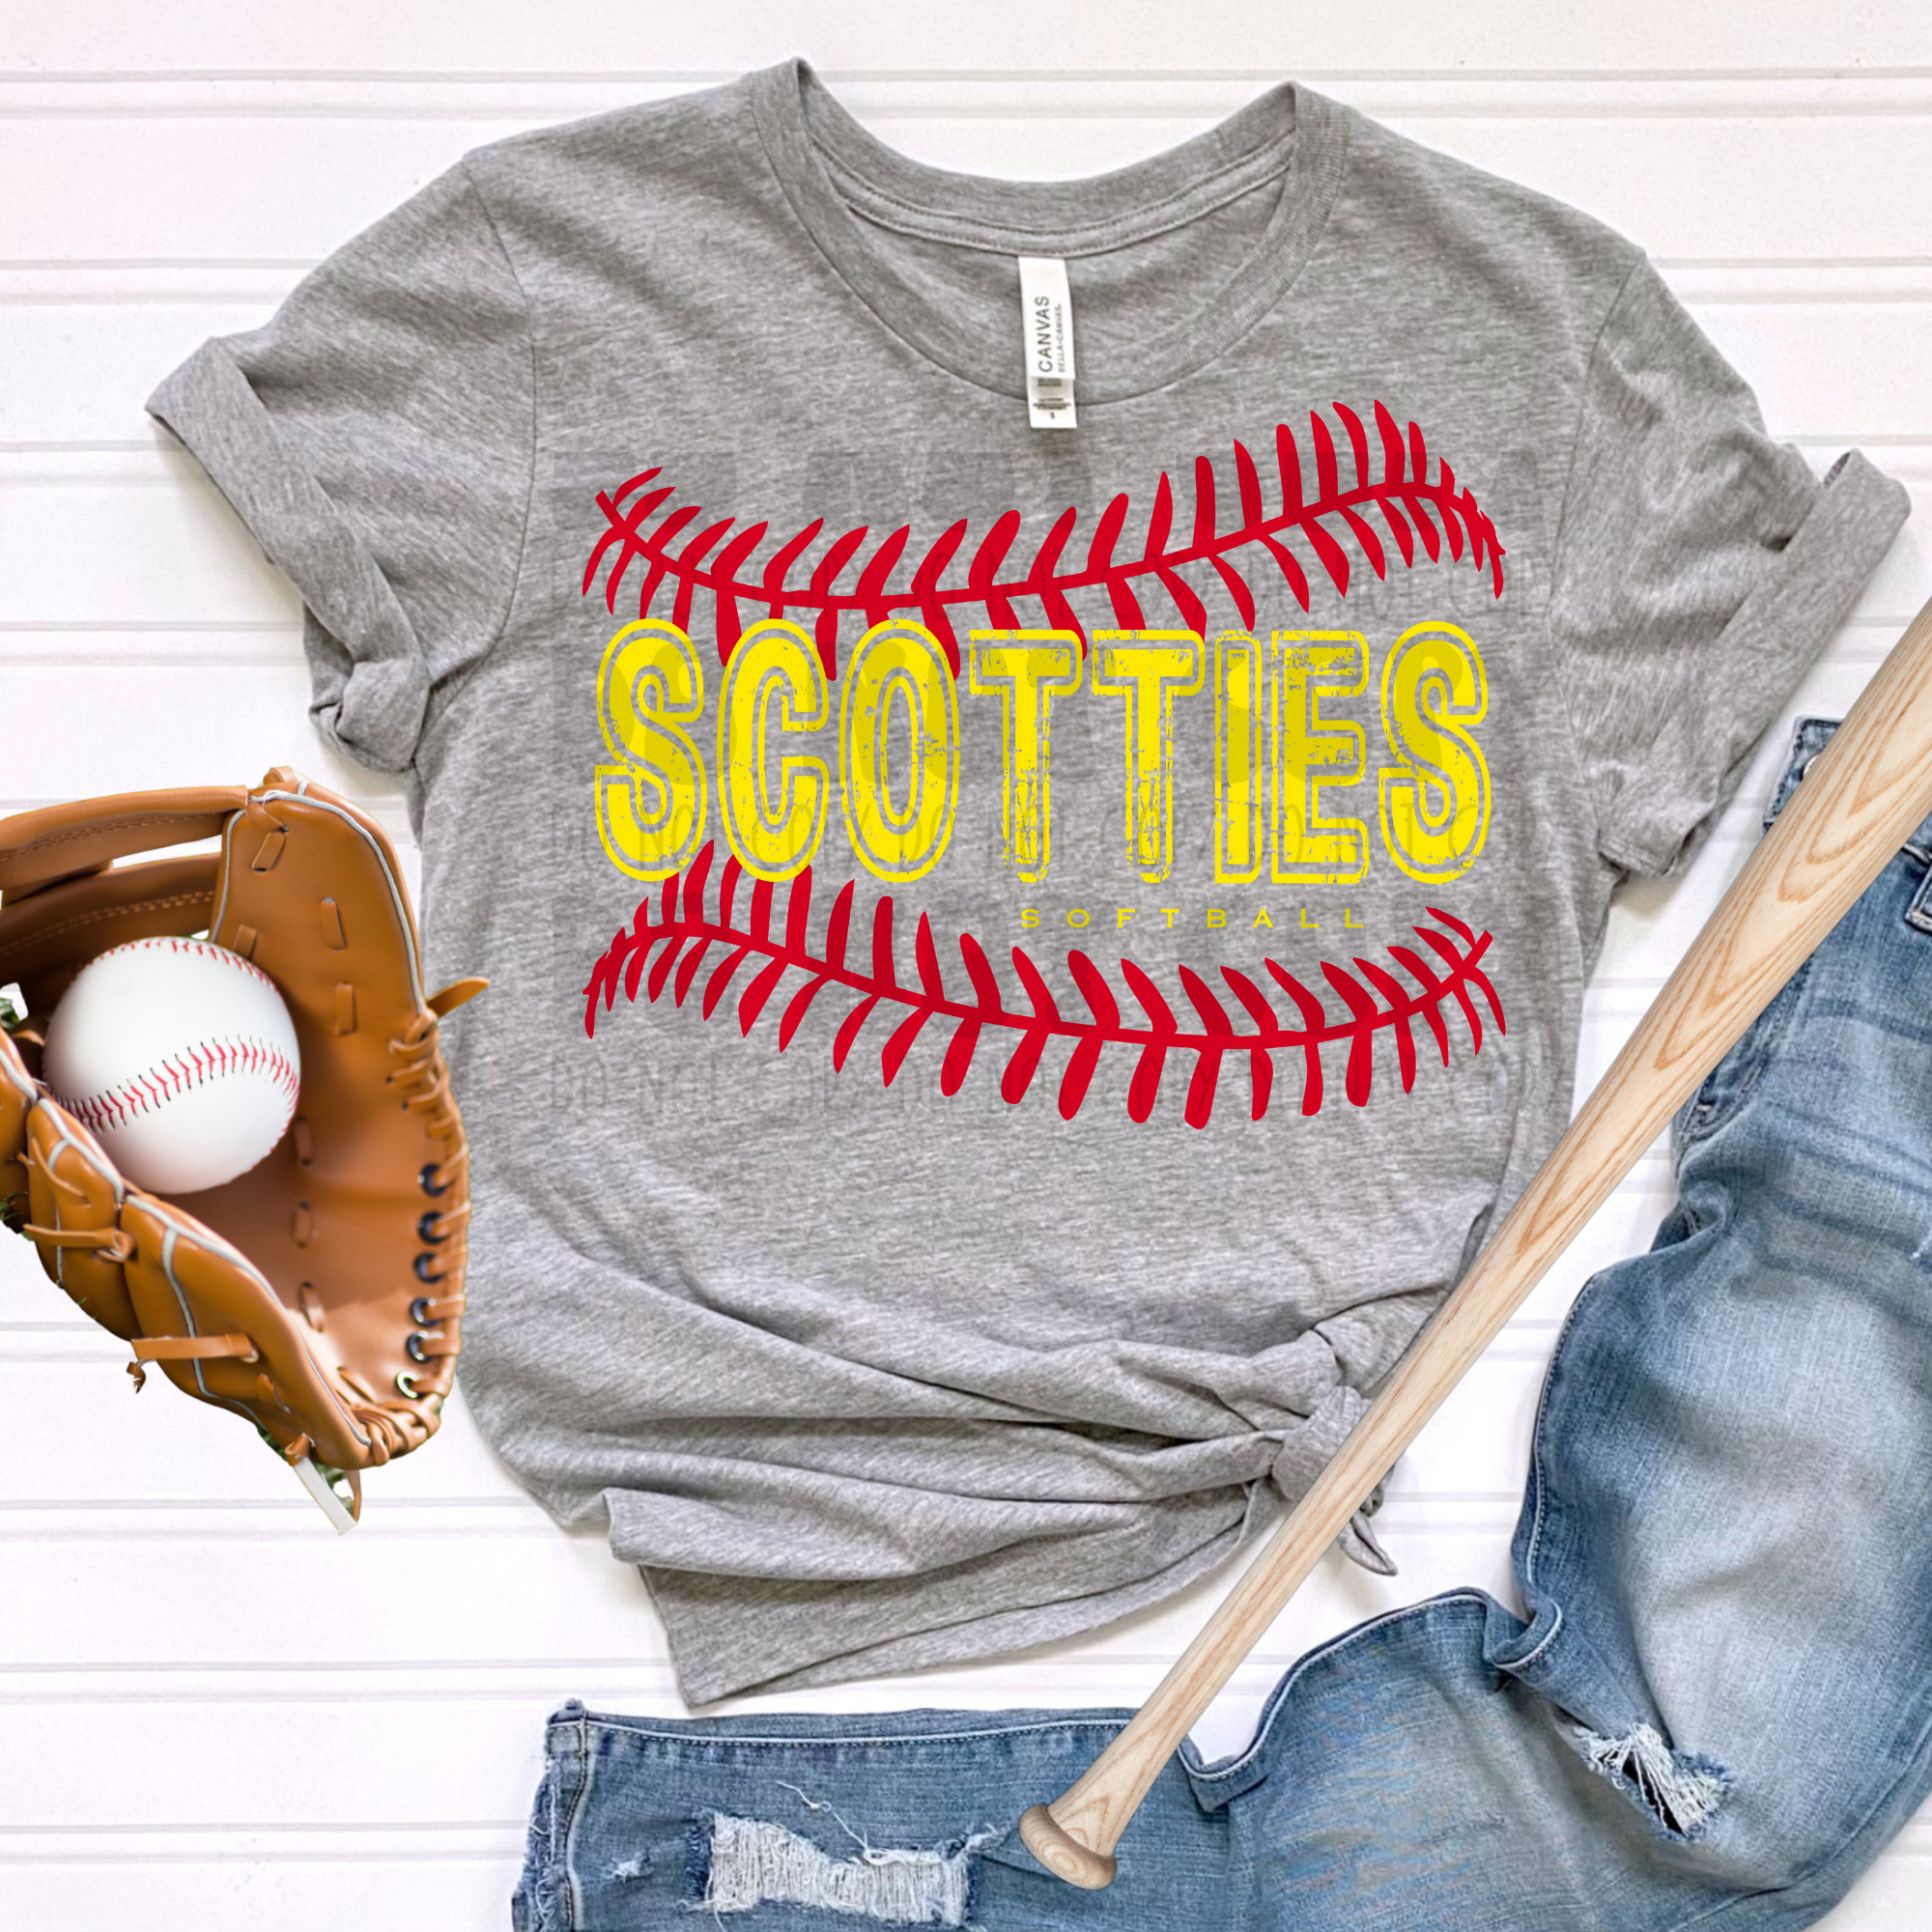 PRE-ORDER - SCOTTIES SOFTBALL TODDLER - YOU CHOOSE COLOR